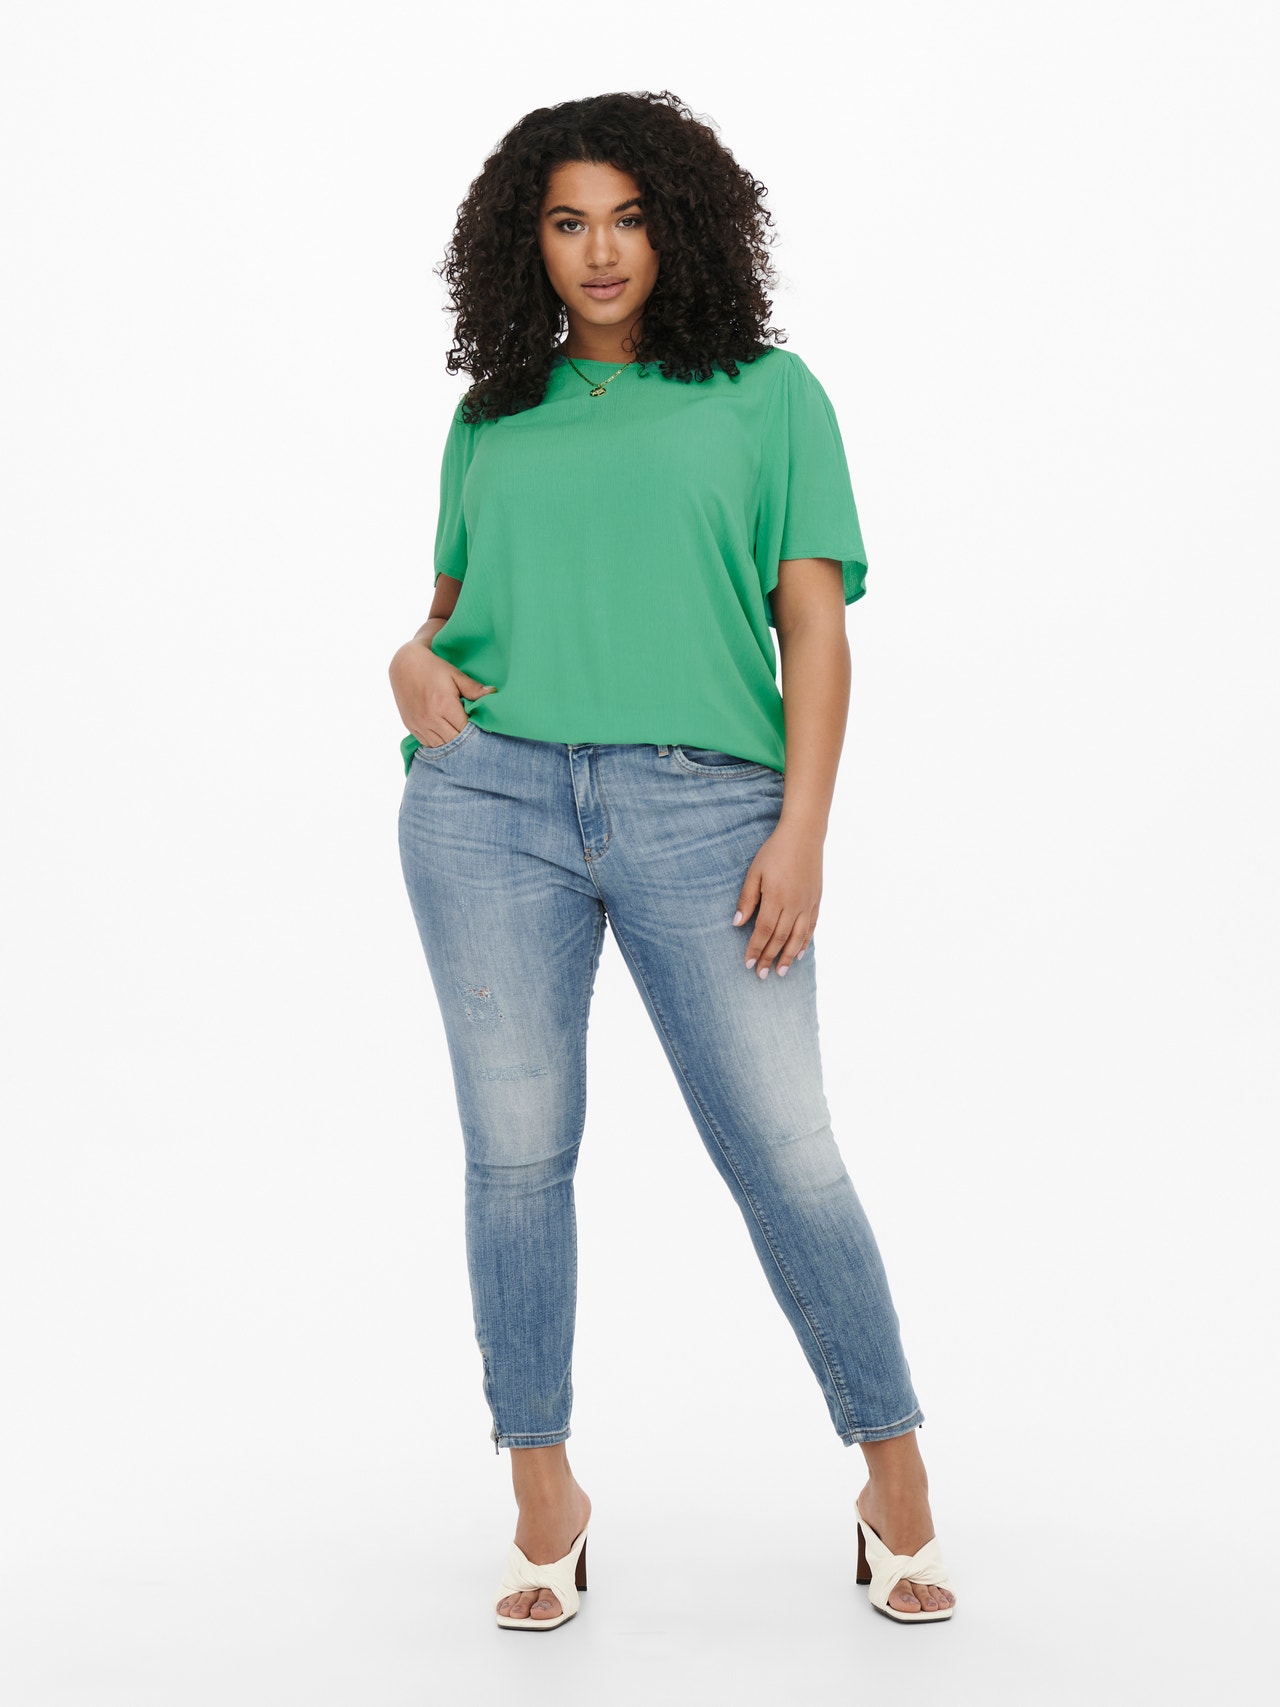 ONLY Curvy short sleeved Top -Marine Green - 15256424